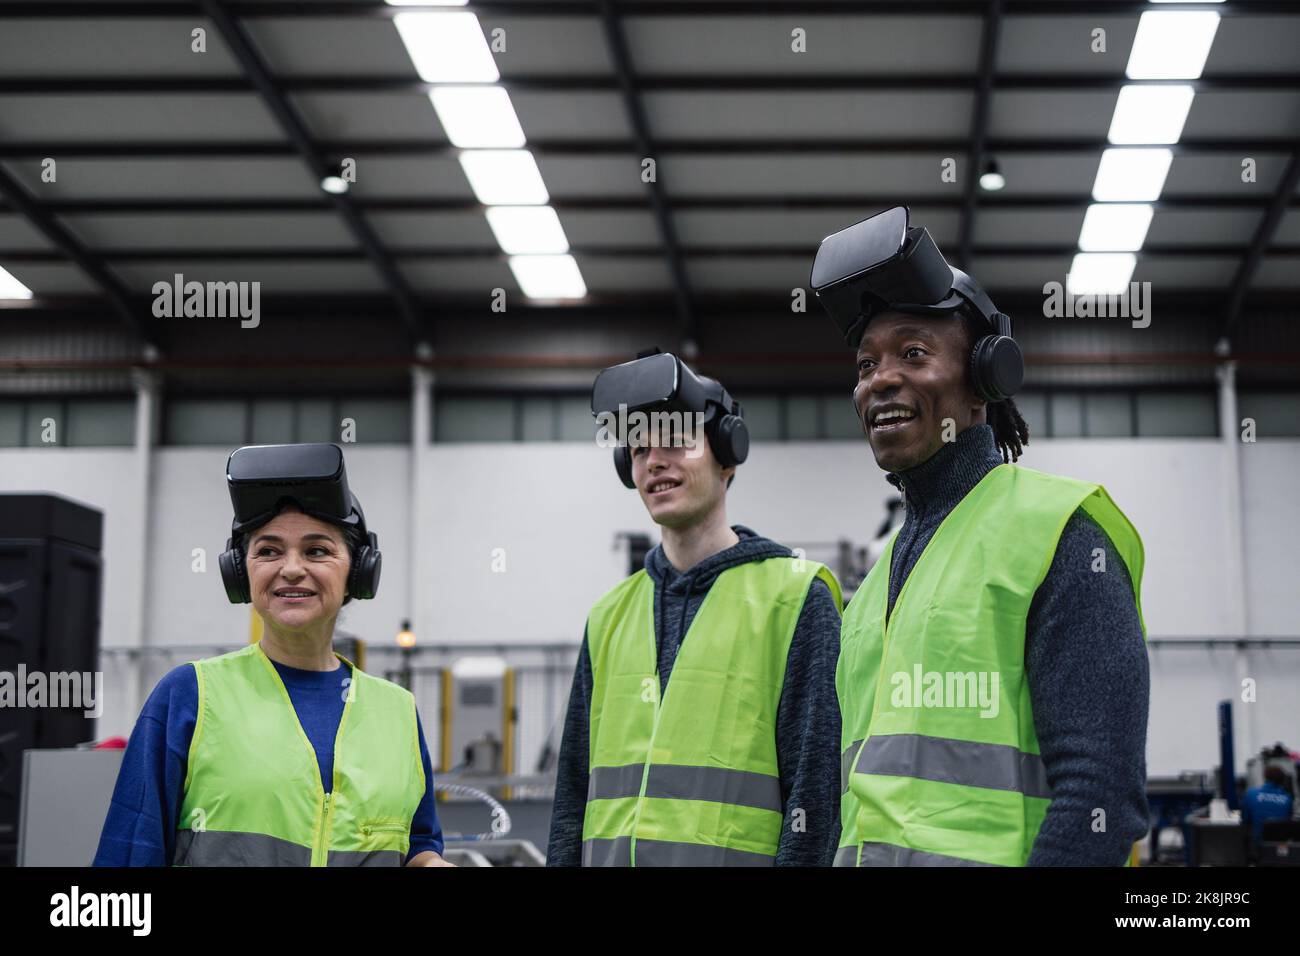 Team of engineers having simulation experience with futuristic virtual reality glasses inside robotic factory - Tech industry and metaverse concept Stock Photo